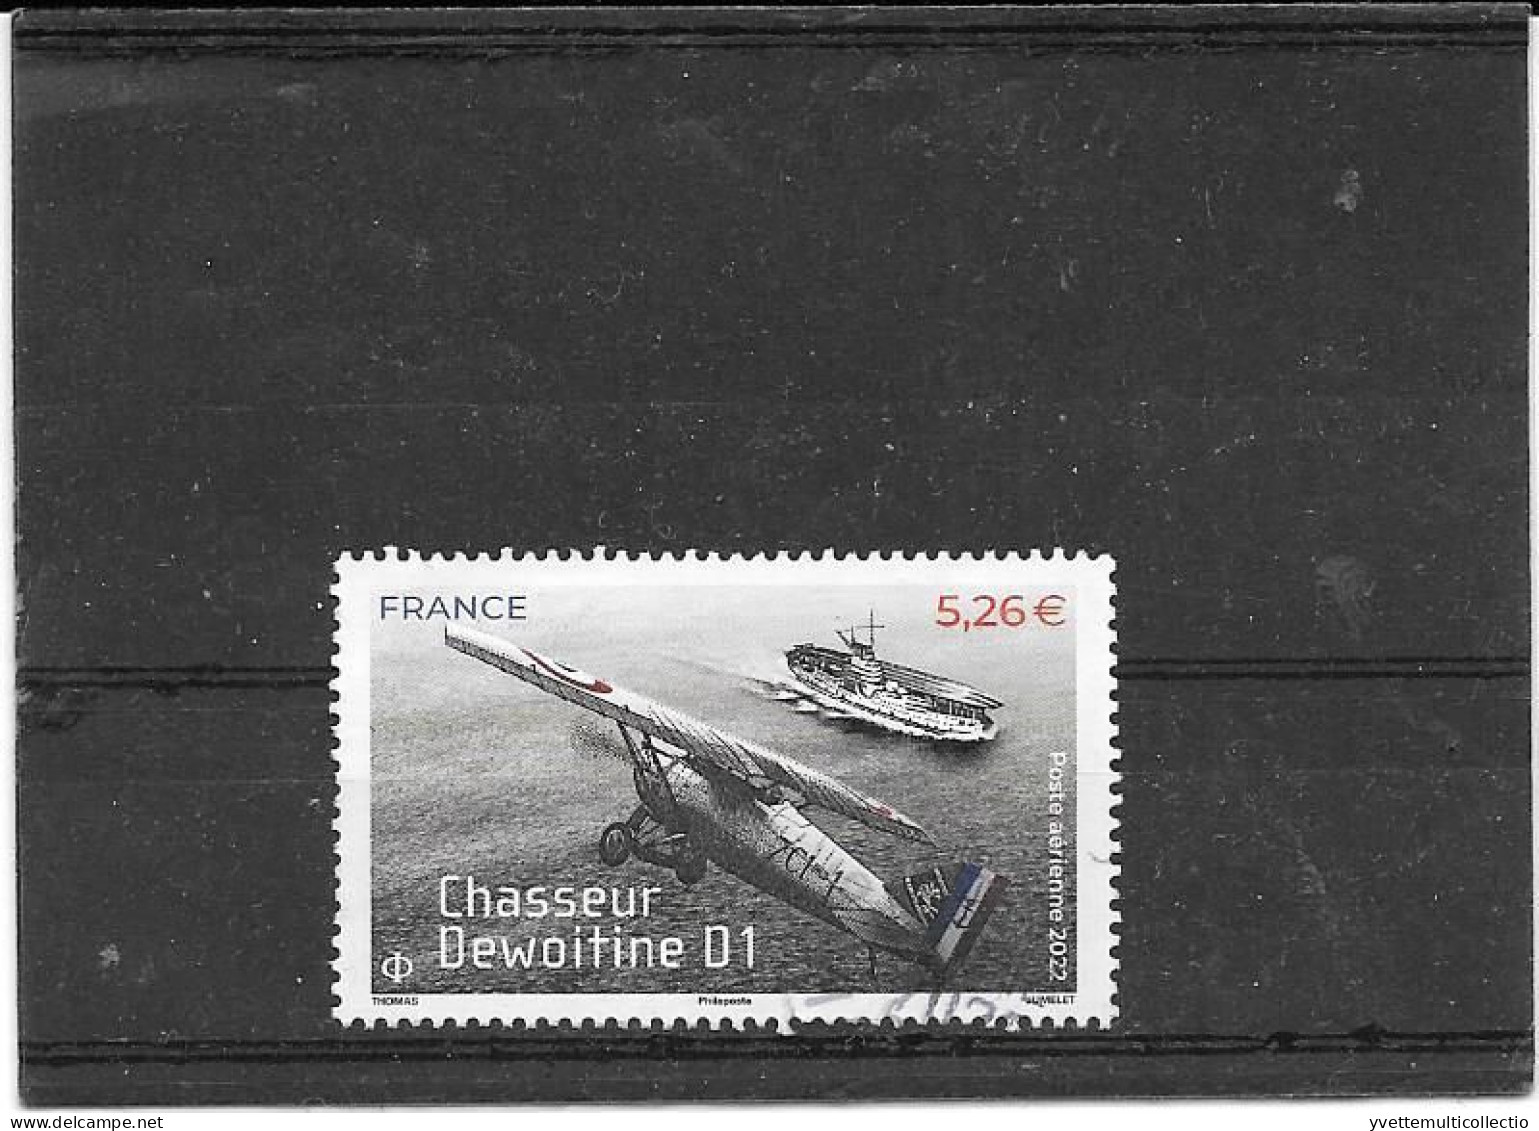 FRANCE  2022   CHASSEUR DEWOITINE D1  TIMBRE GOMME CACHET ROND  PA N° 92 - 1960-.... Gebraucht